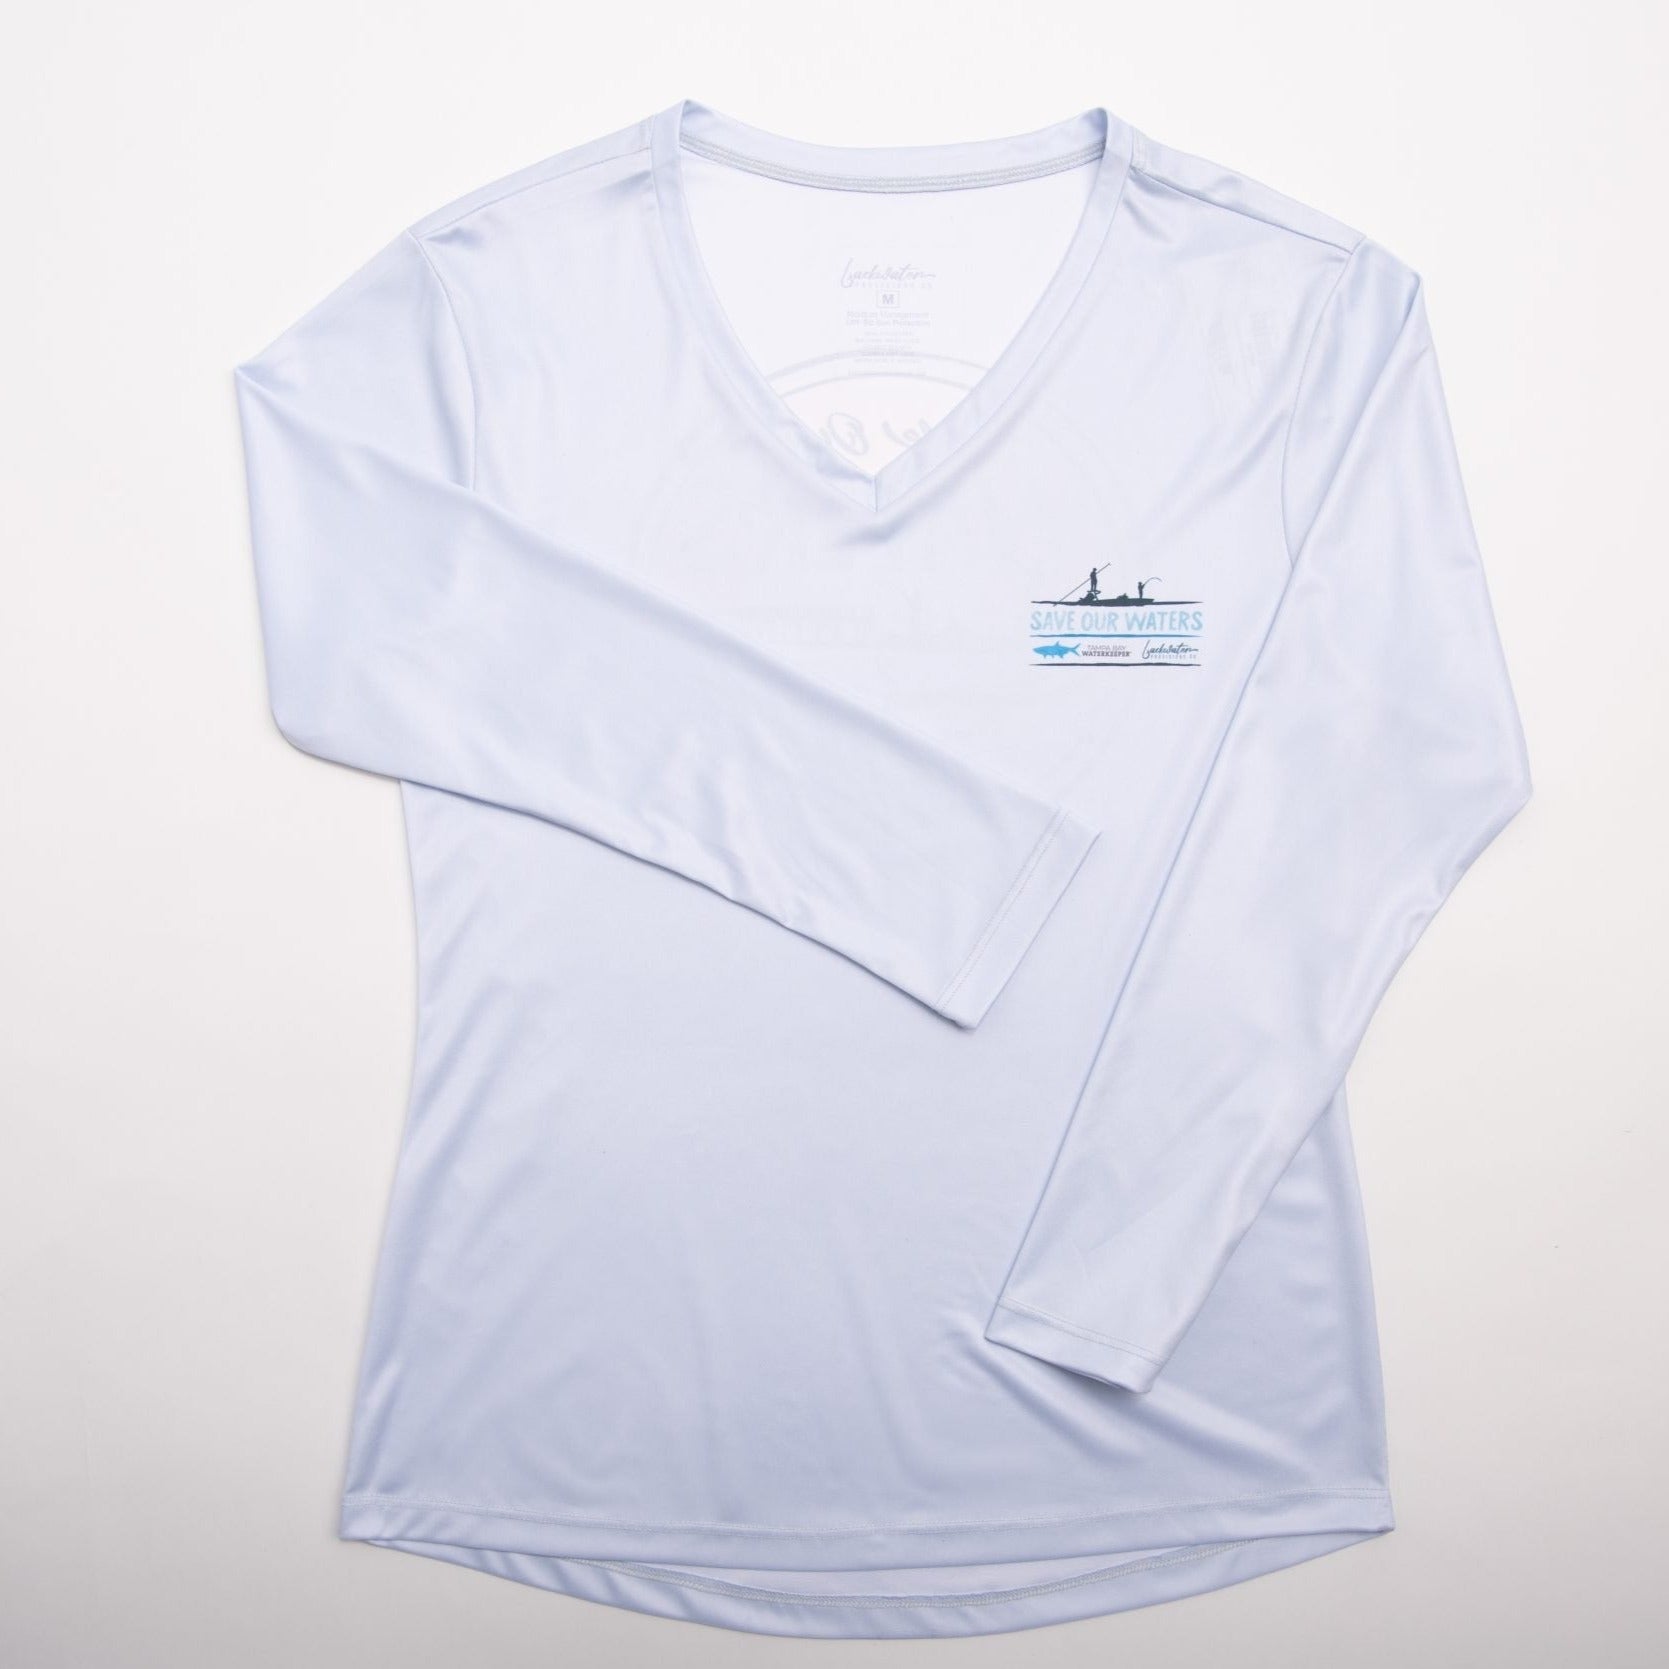 Women's Save Our Waters Performance Shirt